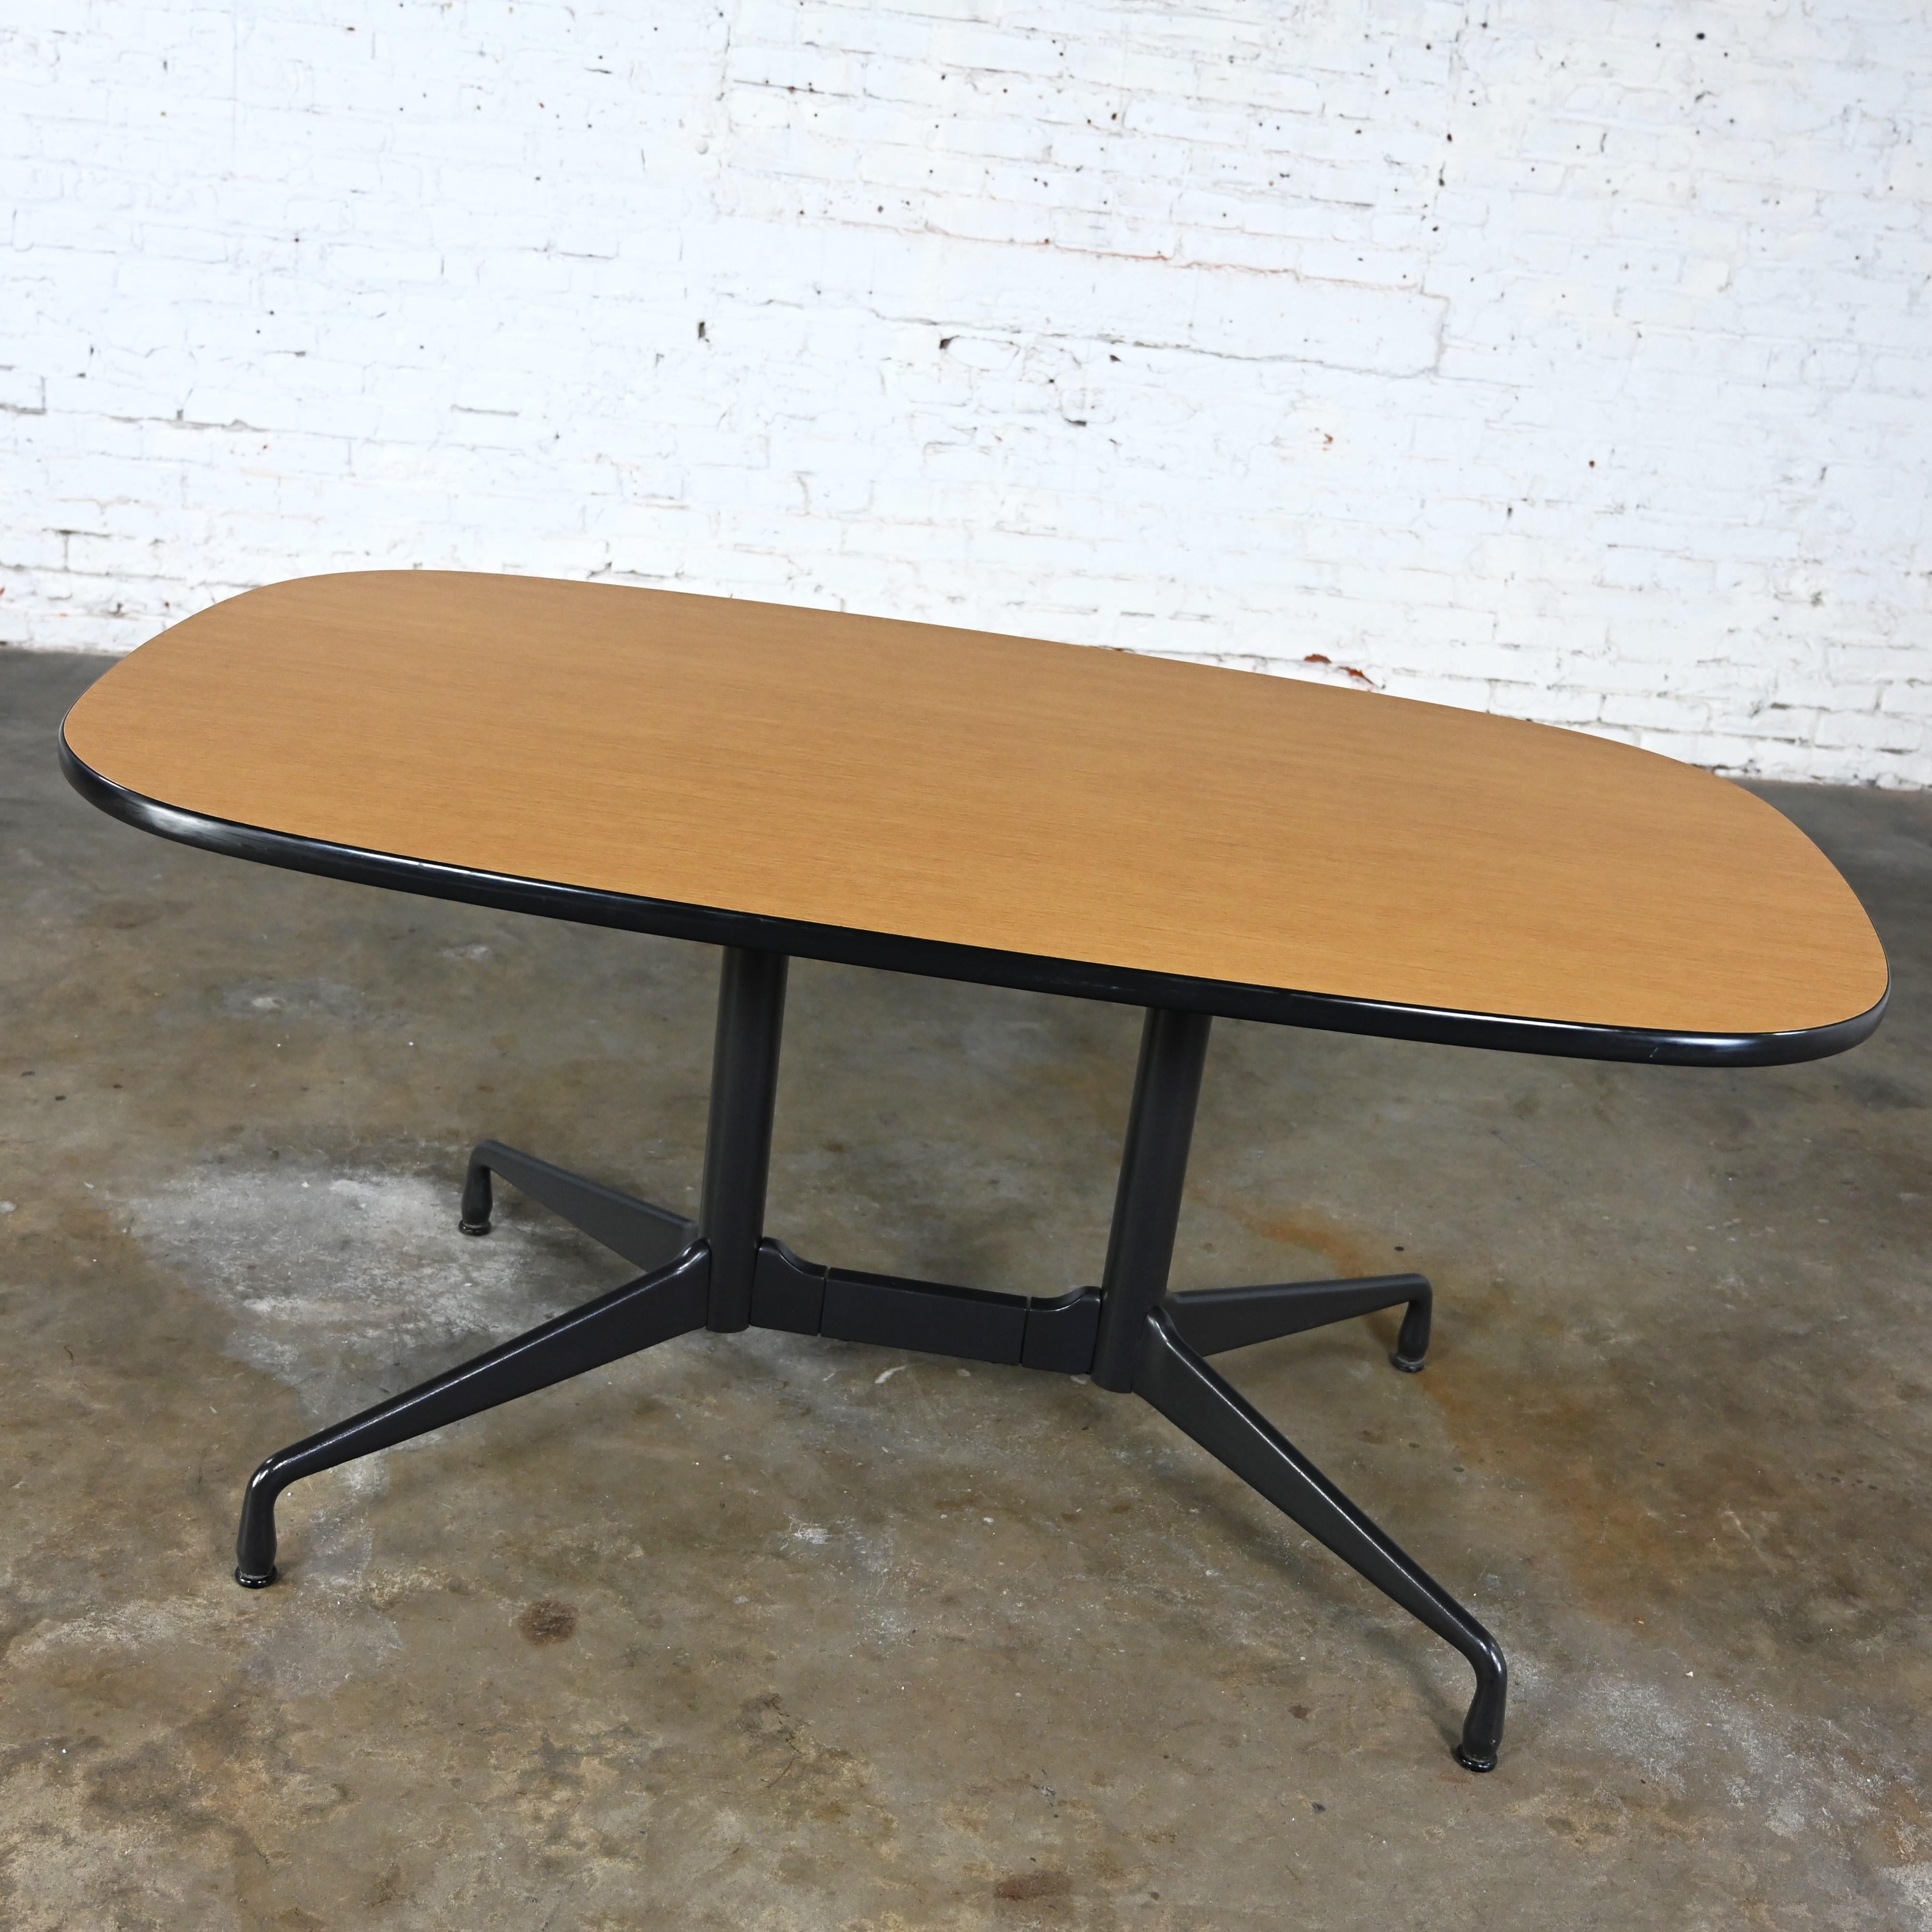 Incredible vintage MCM (Mid-Century Modern) Eames for Herman Miller racetrack oval conference or dining table with a black universal segmented base and a light blonde laminate top with black vinyl edge banding. Beautiful condition, keeping in mind